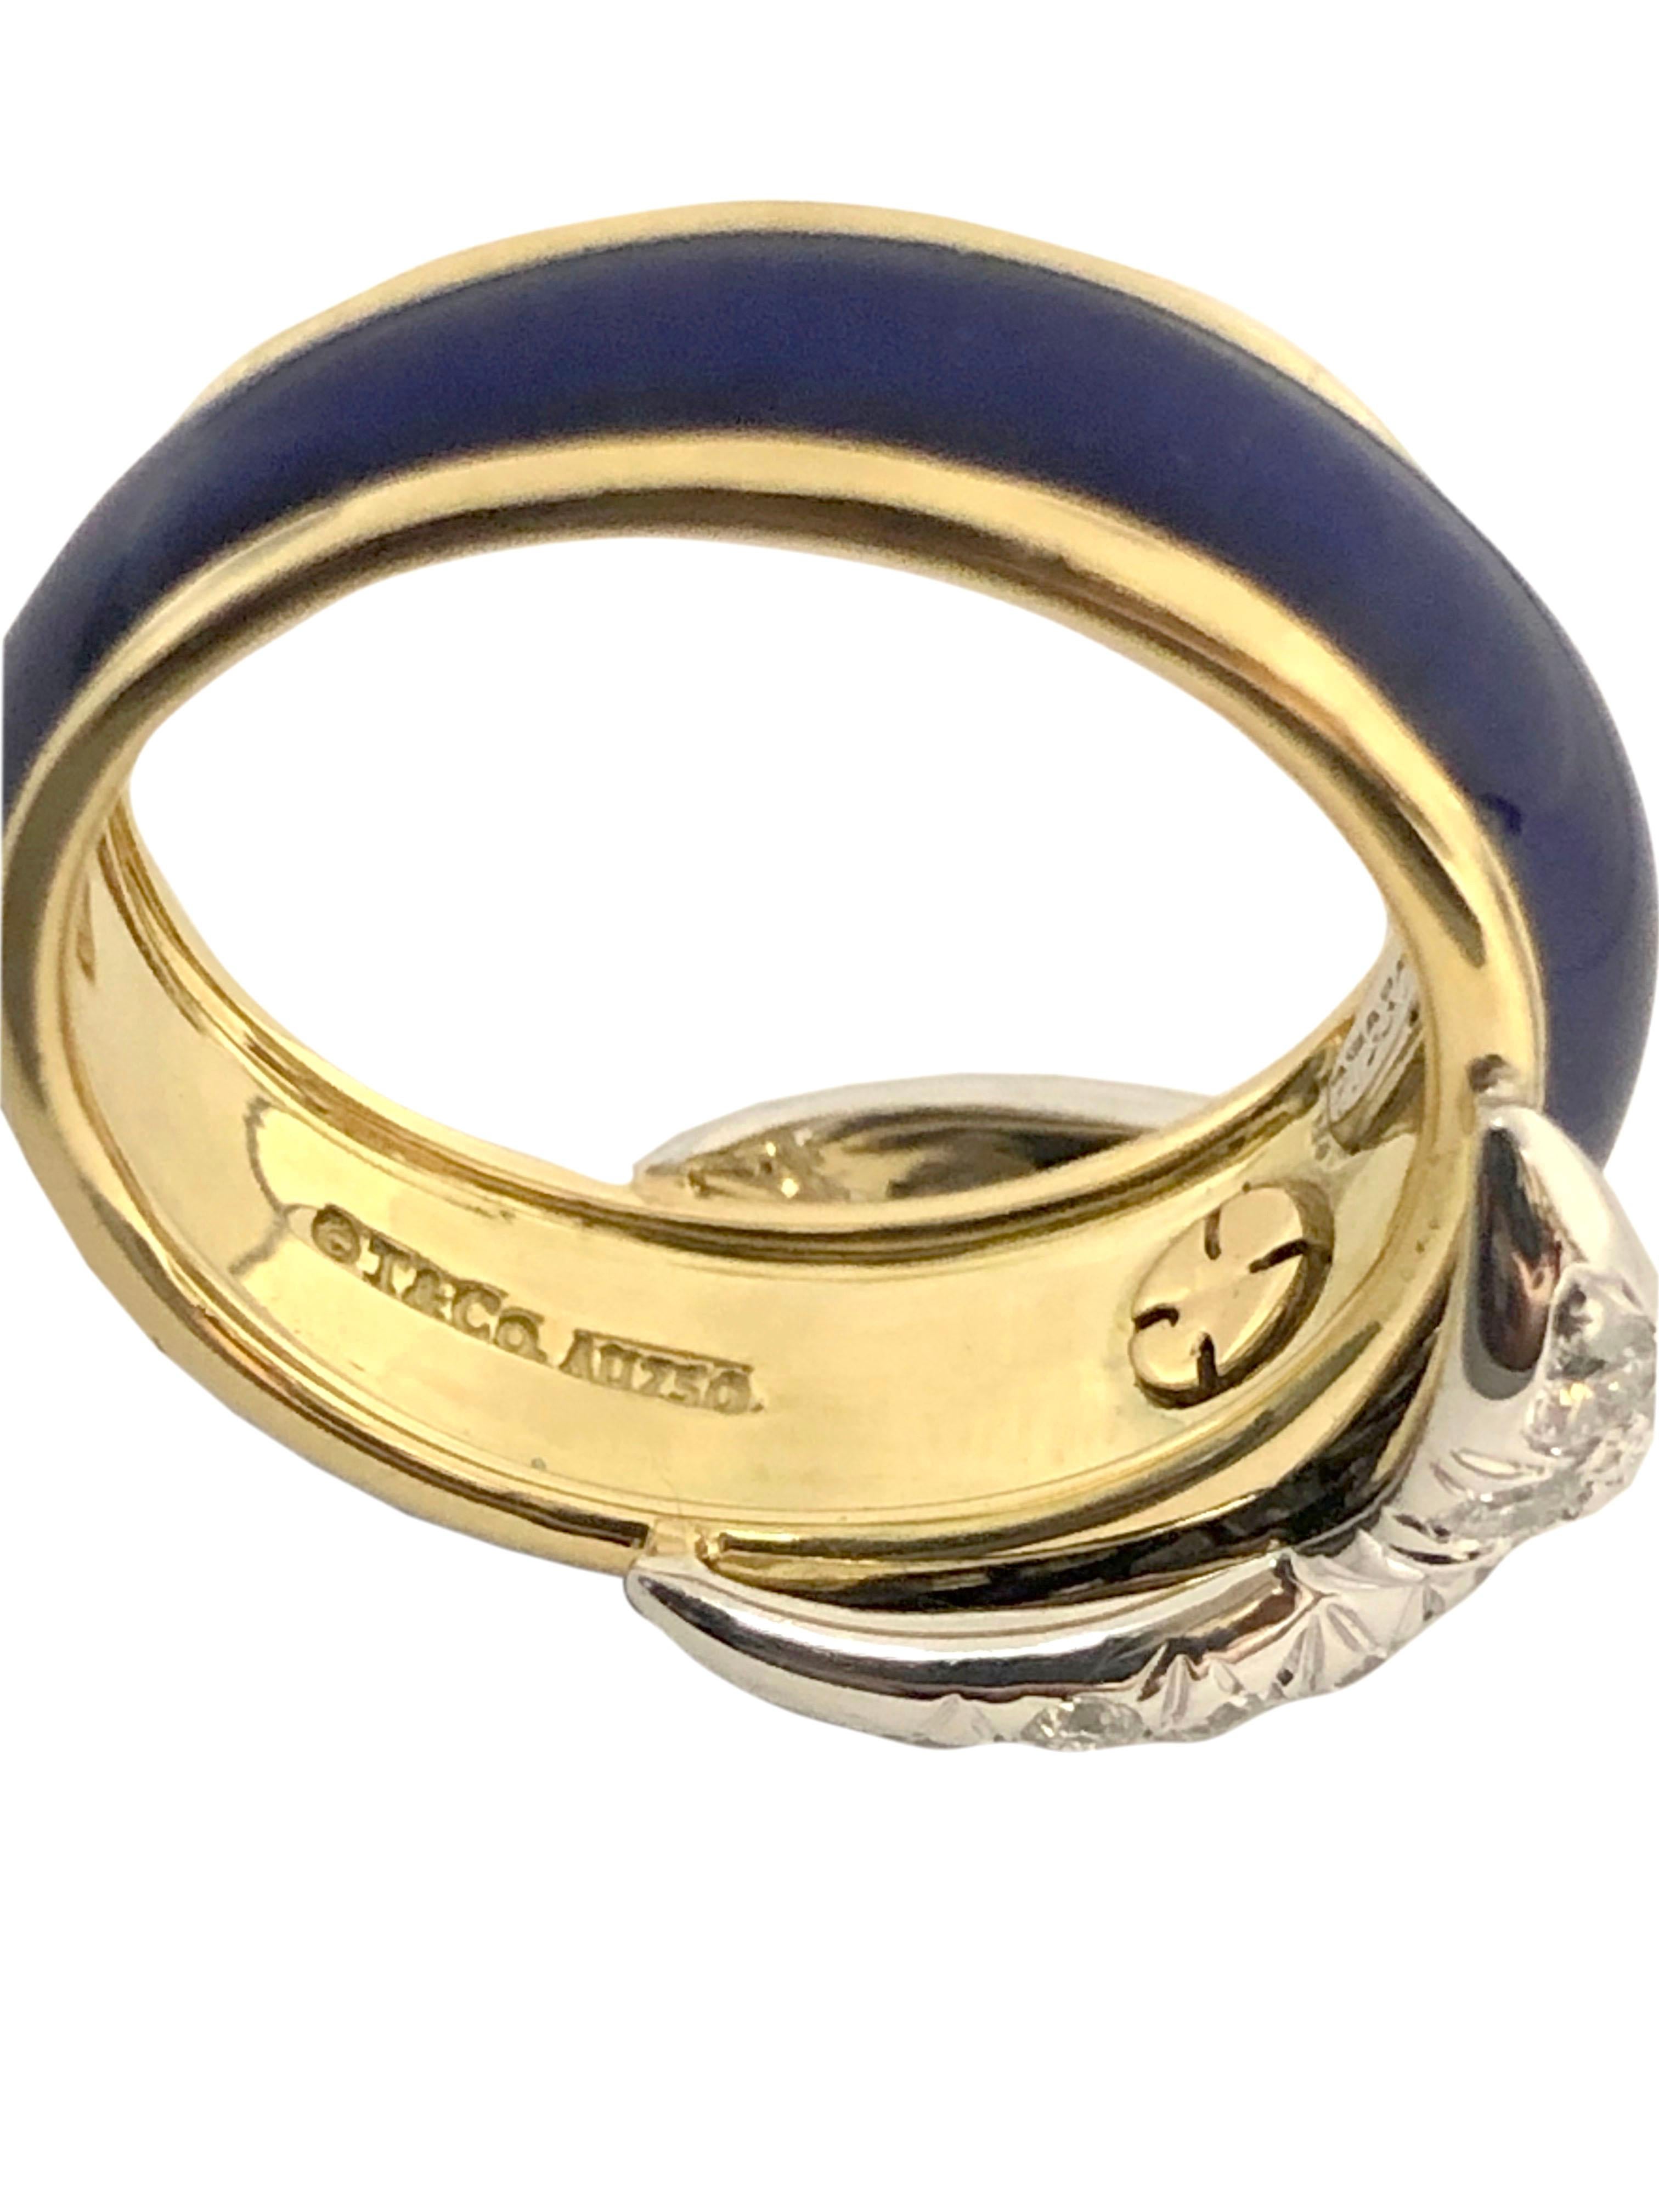 Circa 2000 Jean Schlumberger for Tiffany & Company 18K Yellow Gold and Platinum X Ring, the top of the ring measures 5/8 inch across and is set with Round Brilliant cut Diamonds totaling .85 Carat. Further finished in Cobalt Blue Enamel. Finger size